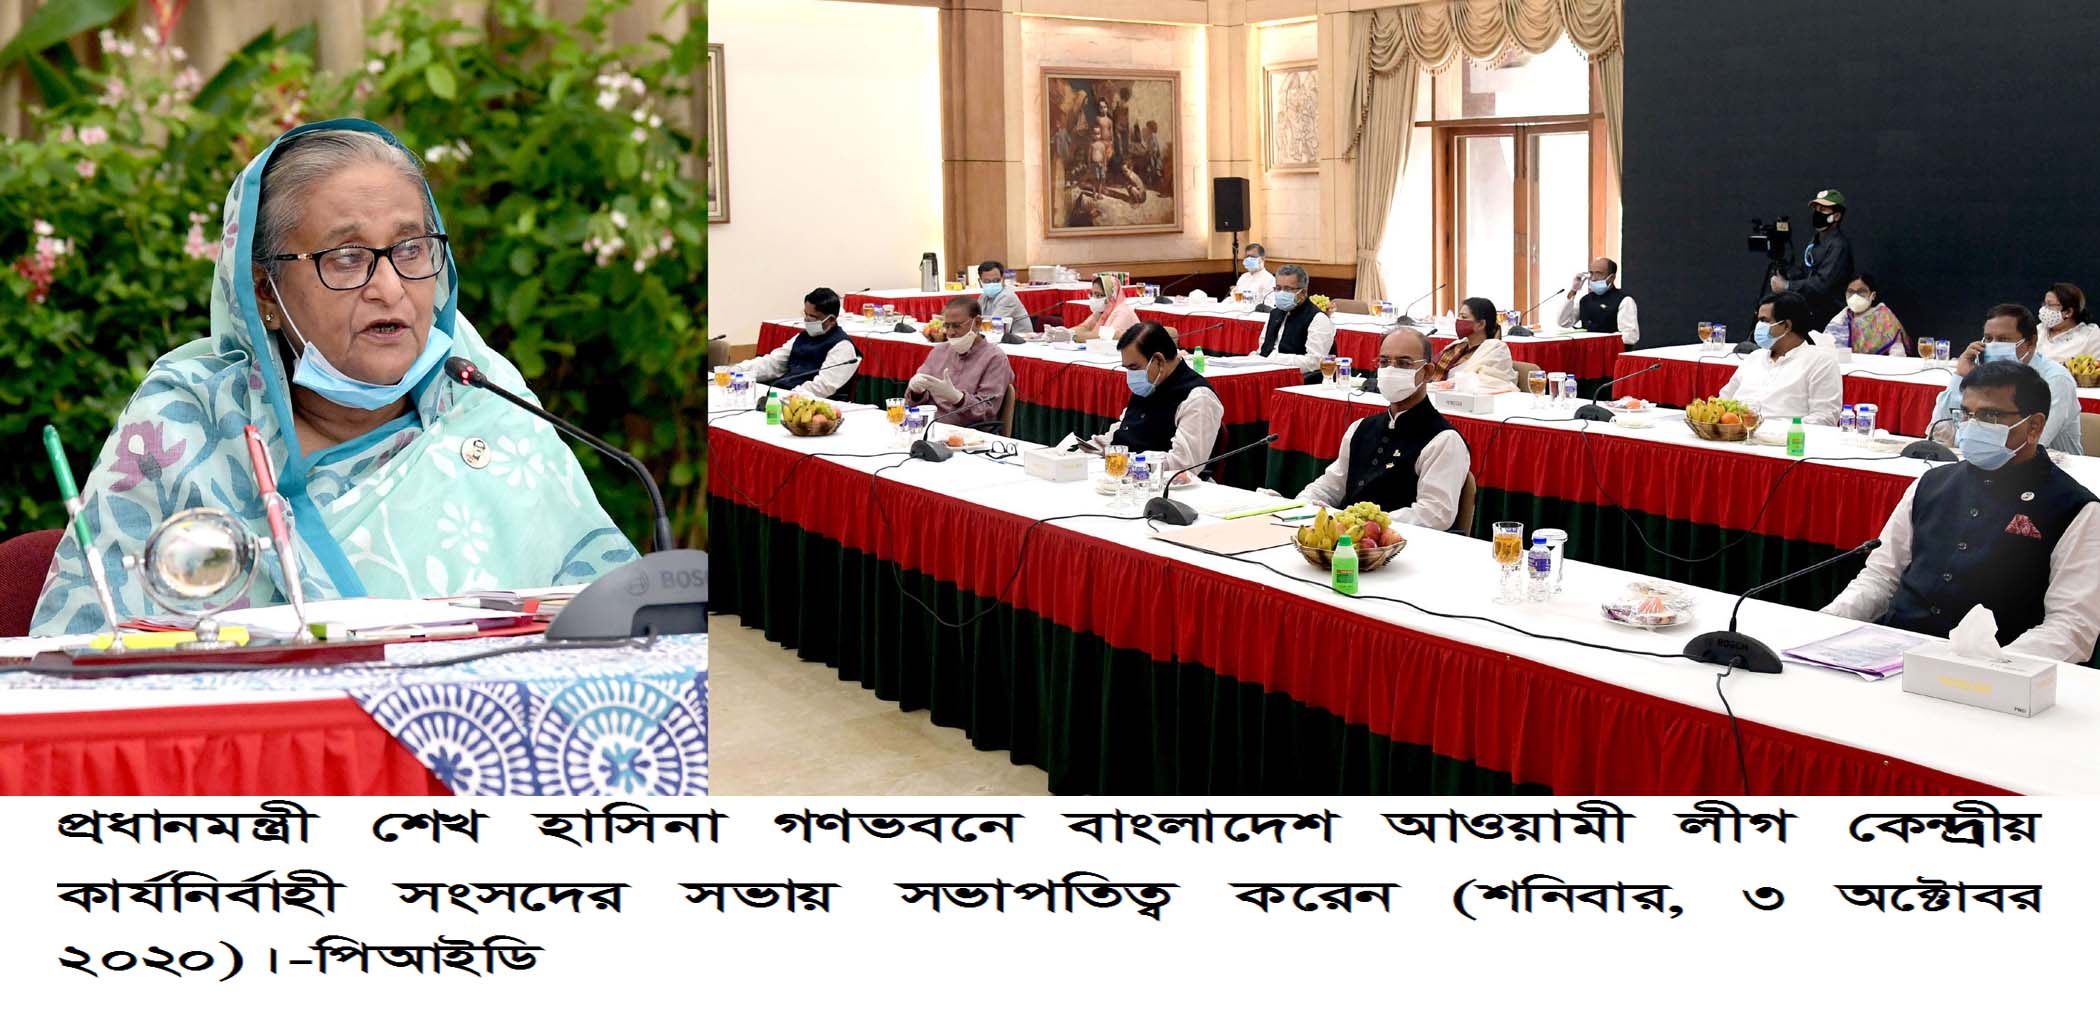 Sheikh Hasina attends Awami League session